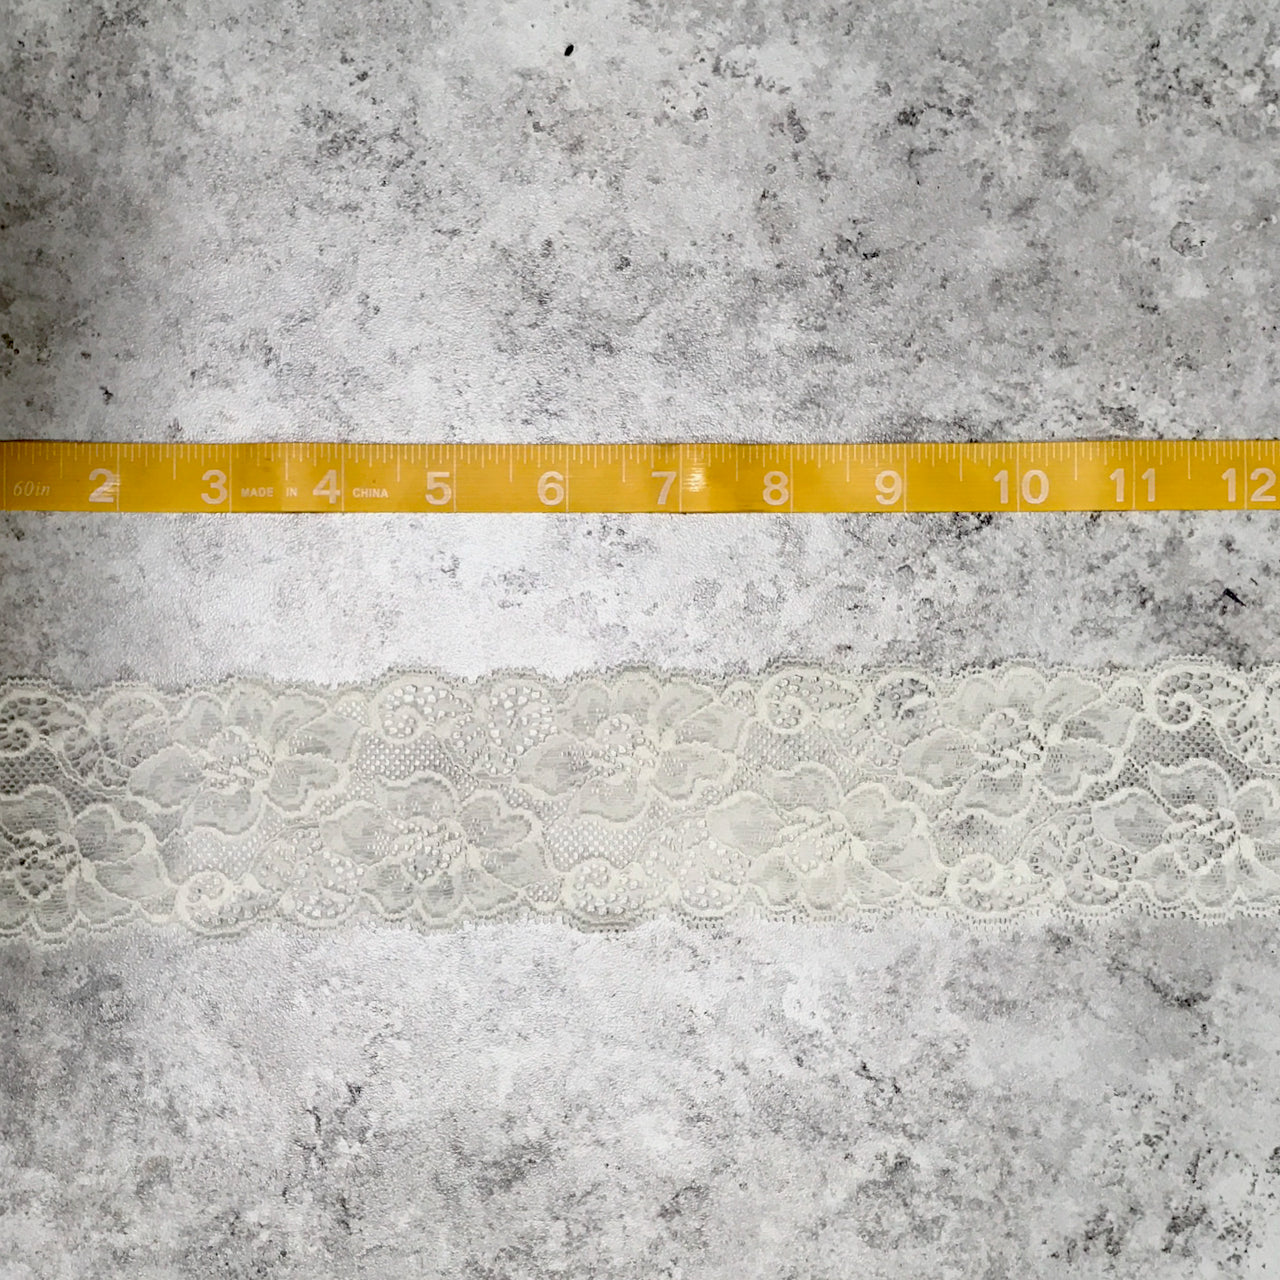 Trim Lace / Pretty Pansies Cream - Sold by the half yard